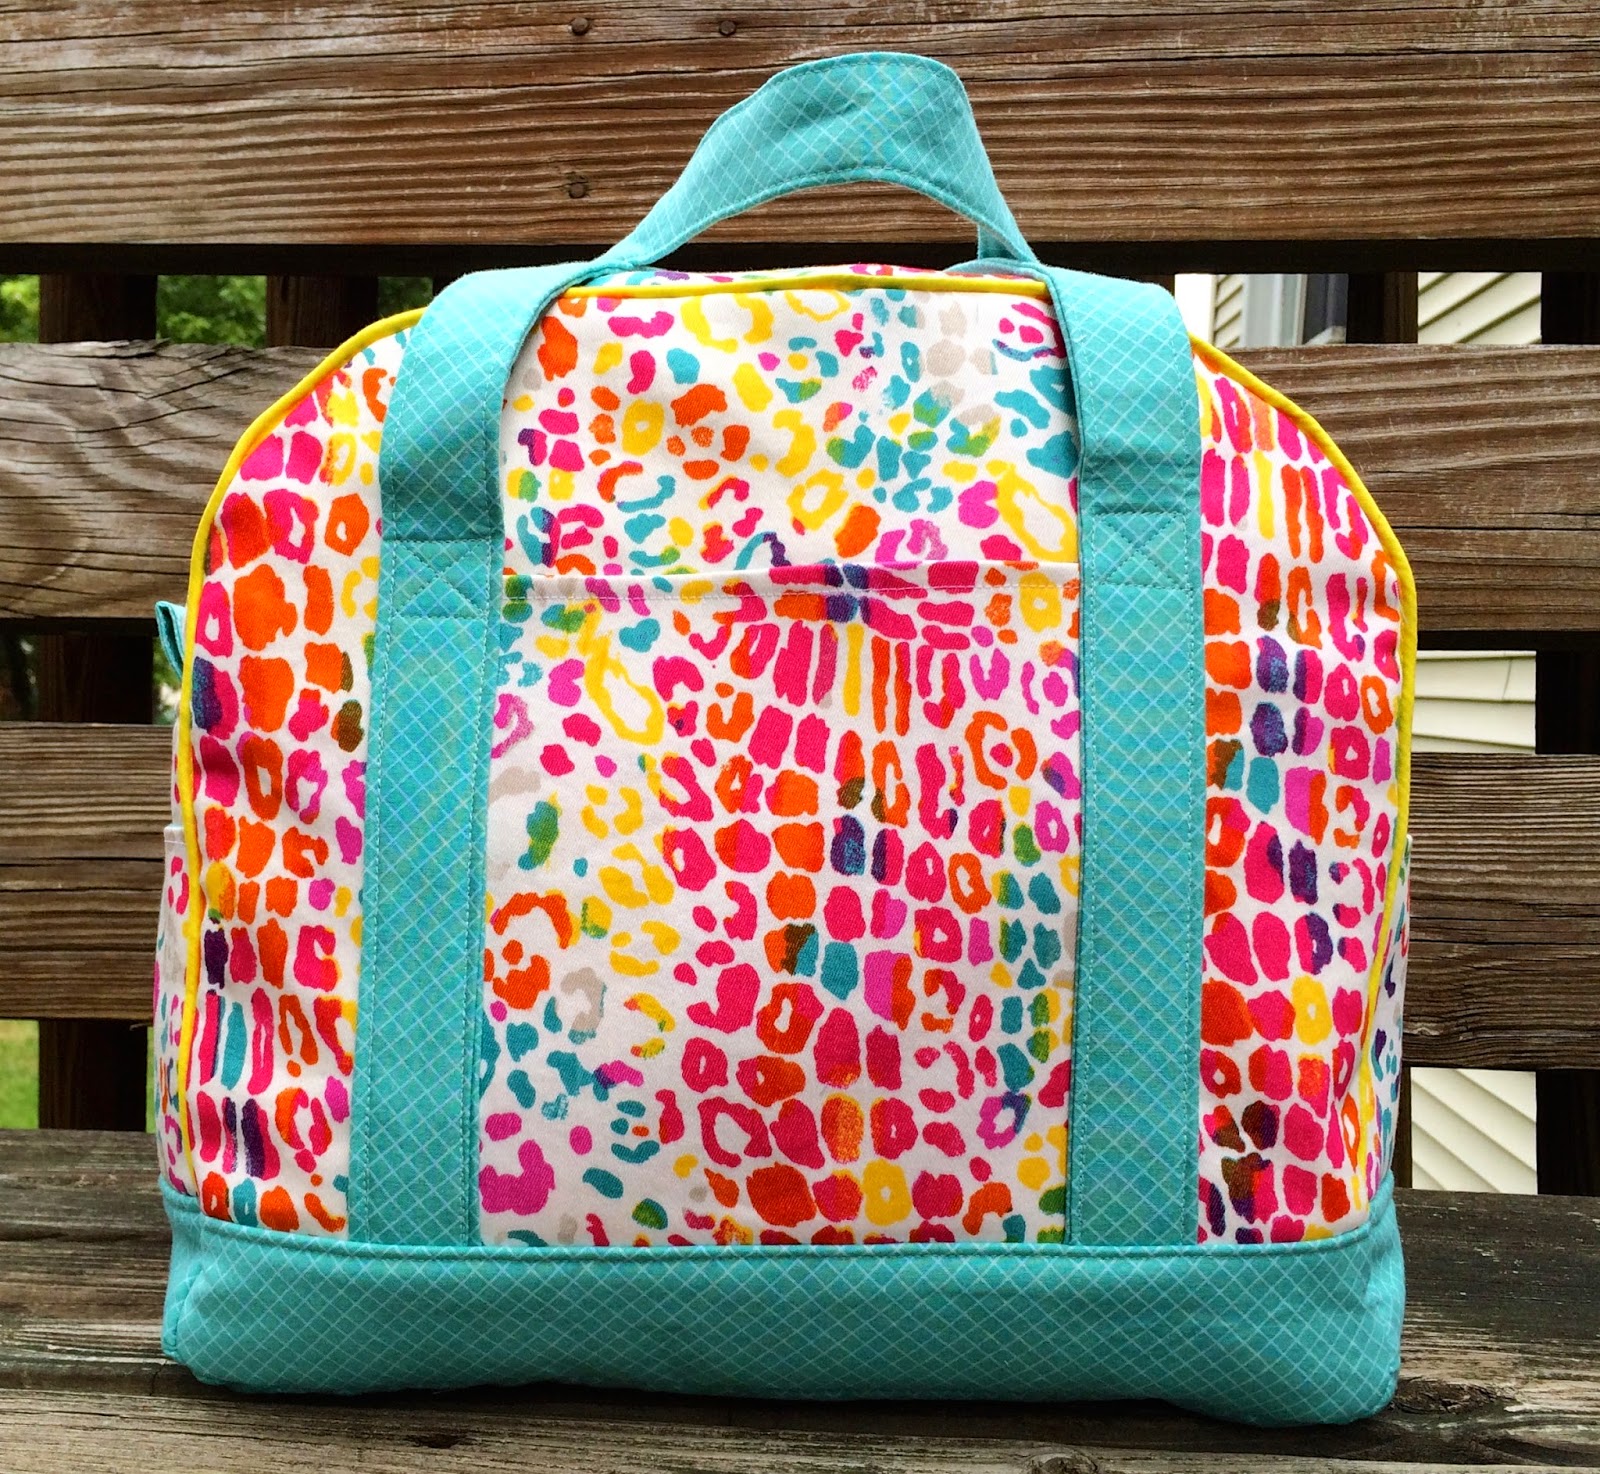 Stitched by Crystal's Sunny Daytripper Bag — Pattern Revolution